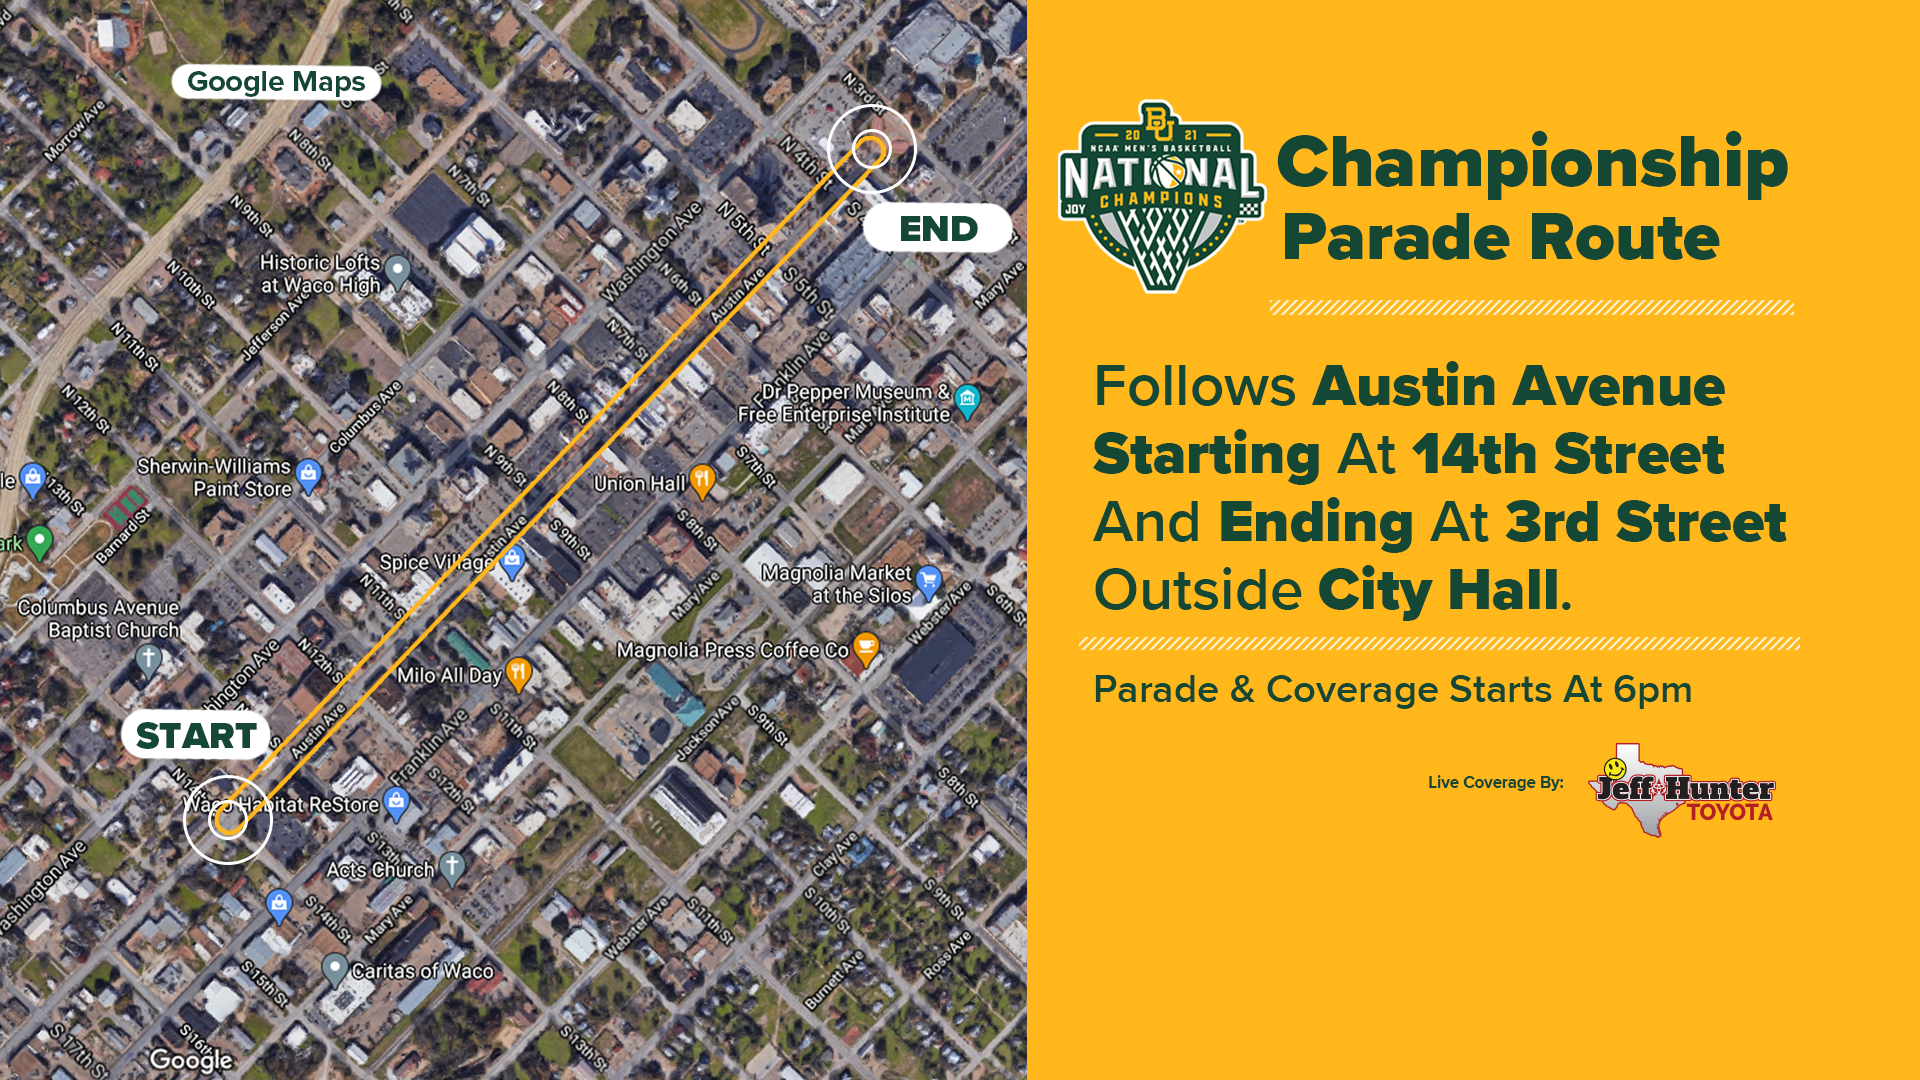 There will also be a ceremony outside of Waco City Hall to celebrate the Bears' National Championship win.